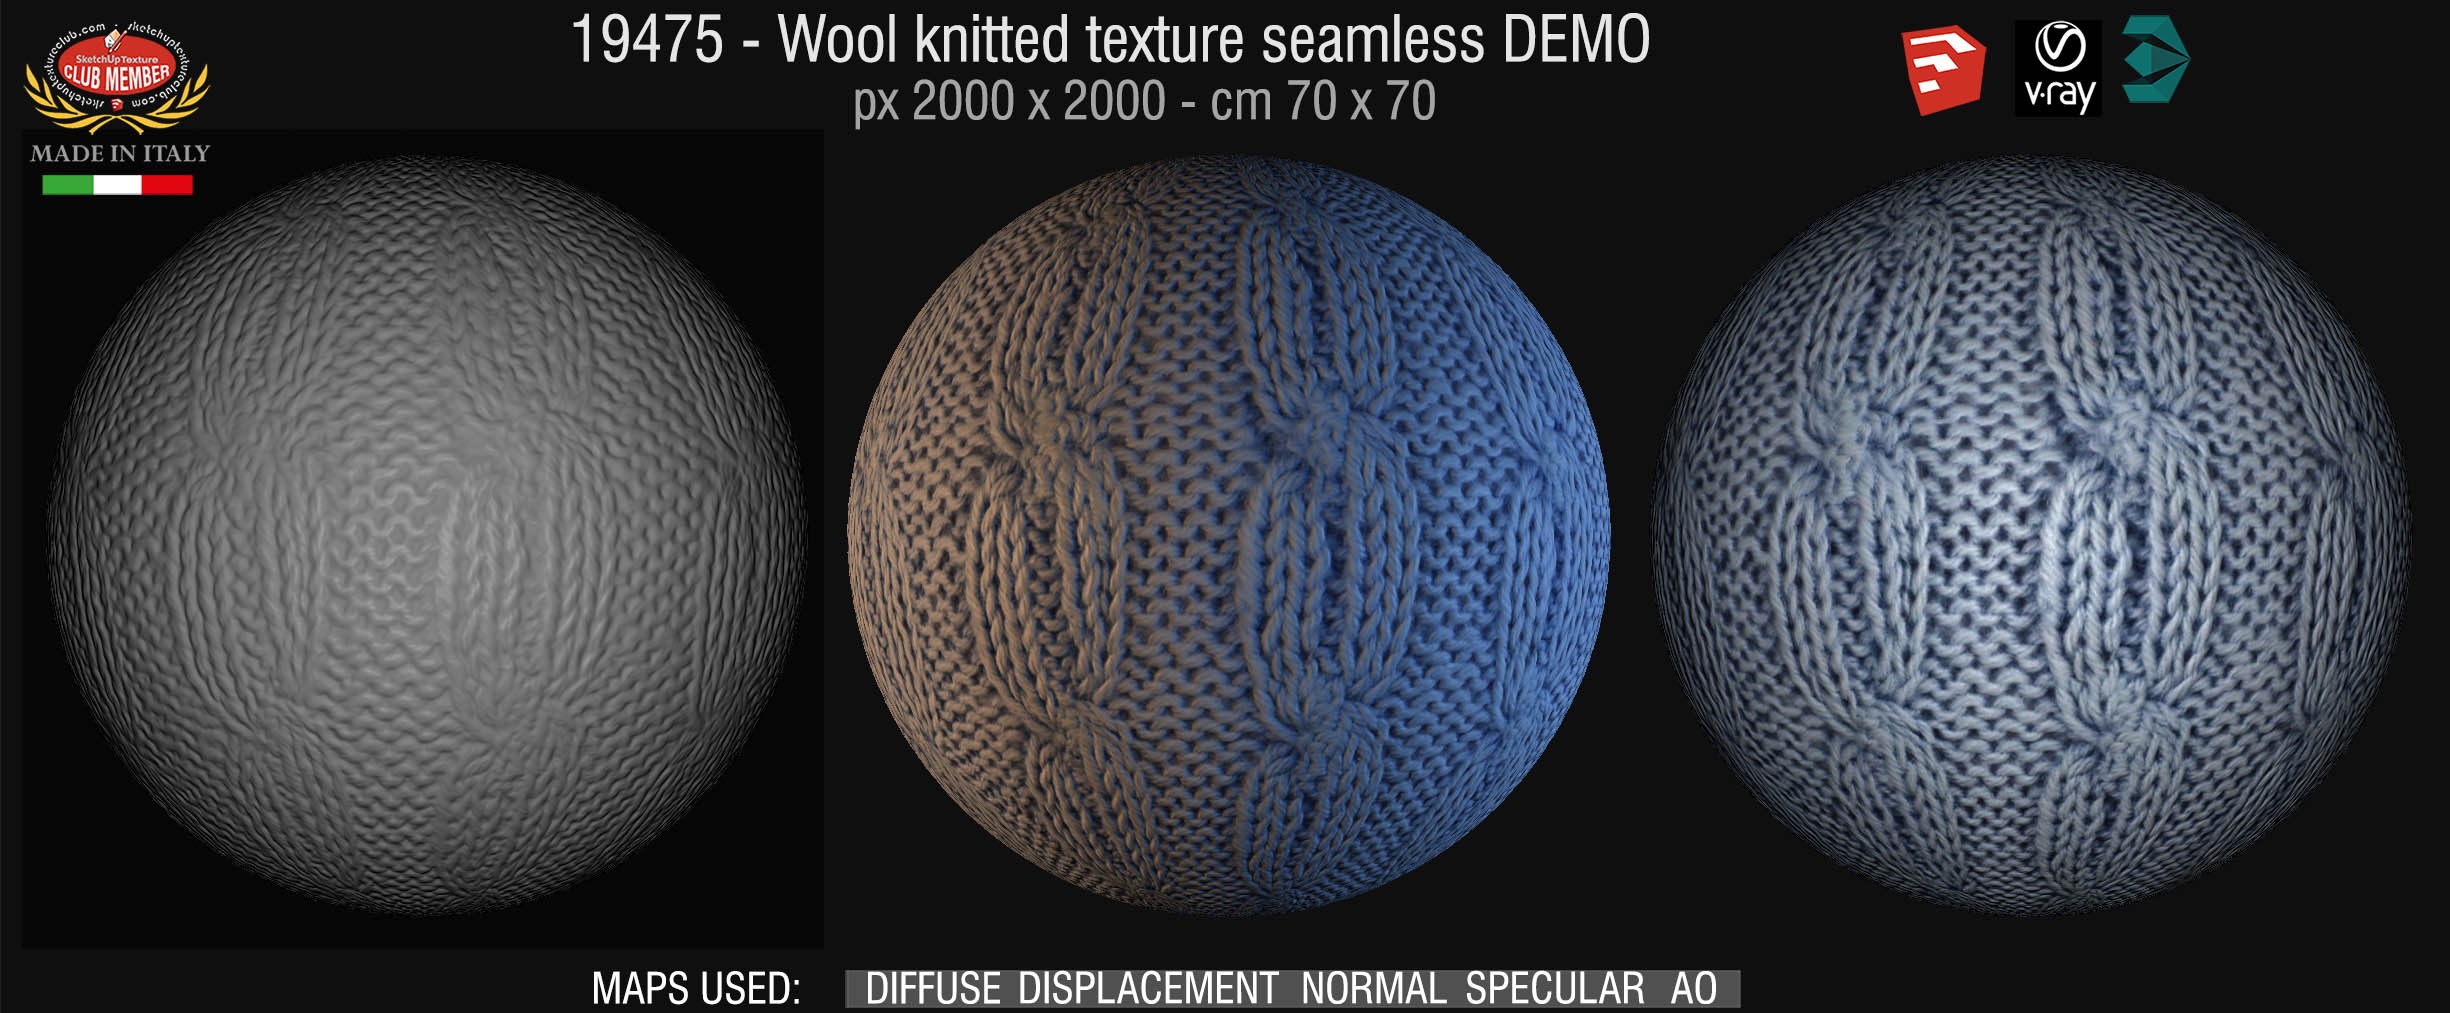 19475 Wool knitted texture seamless + maps DEMO